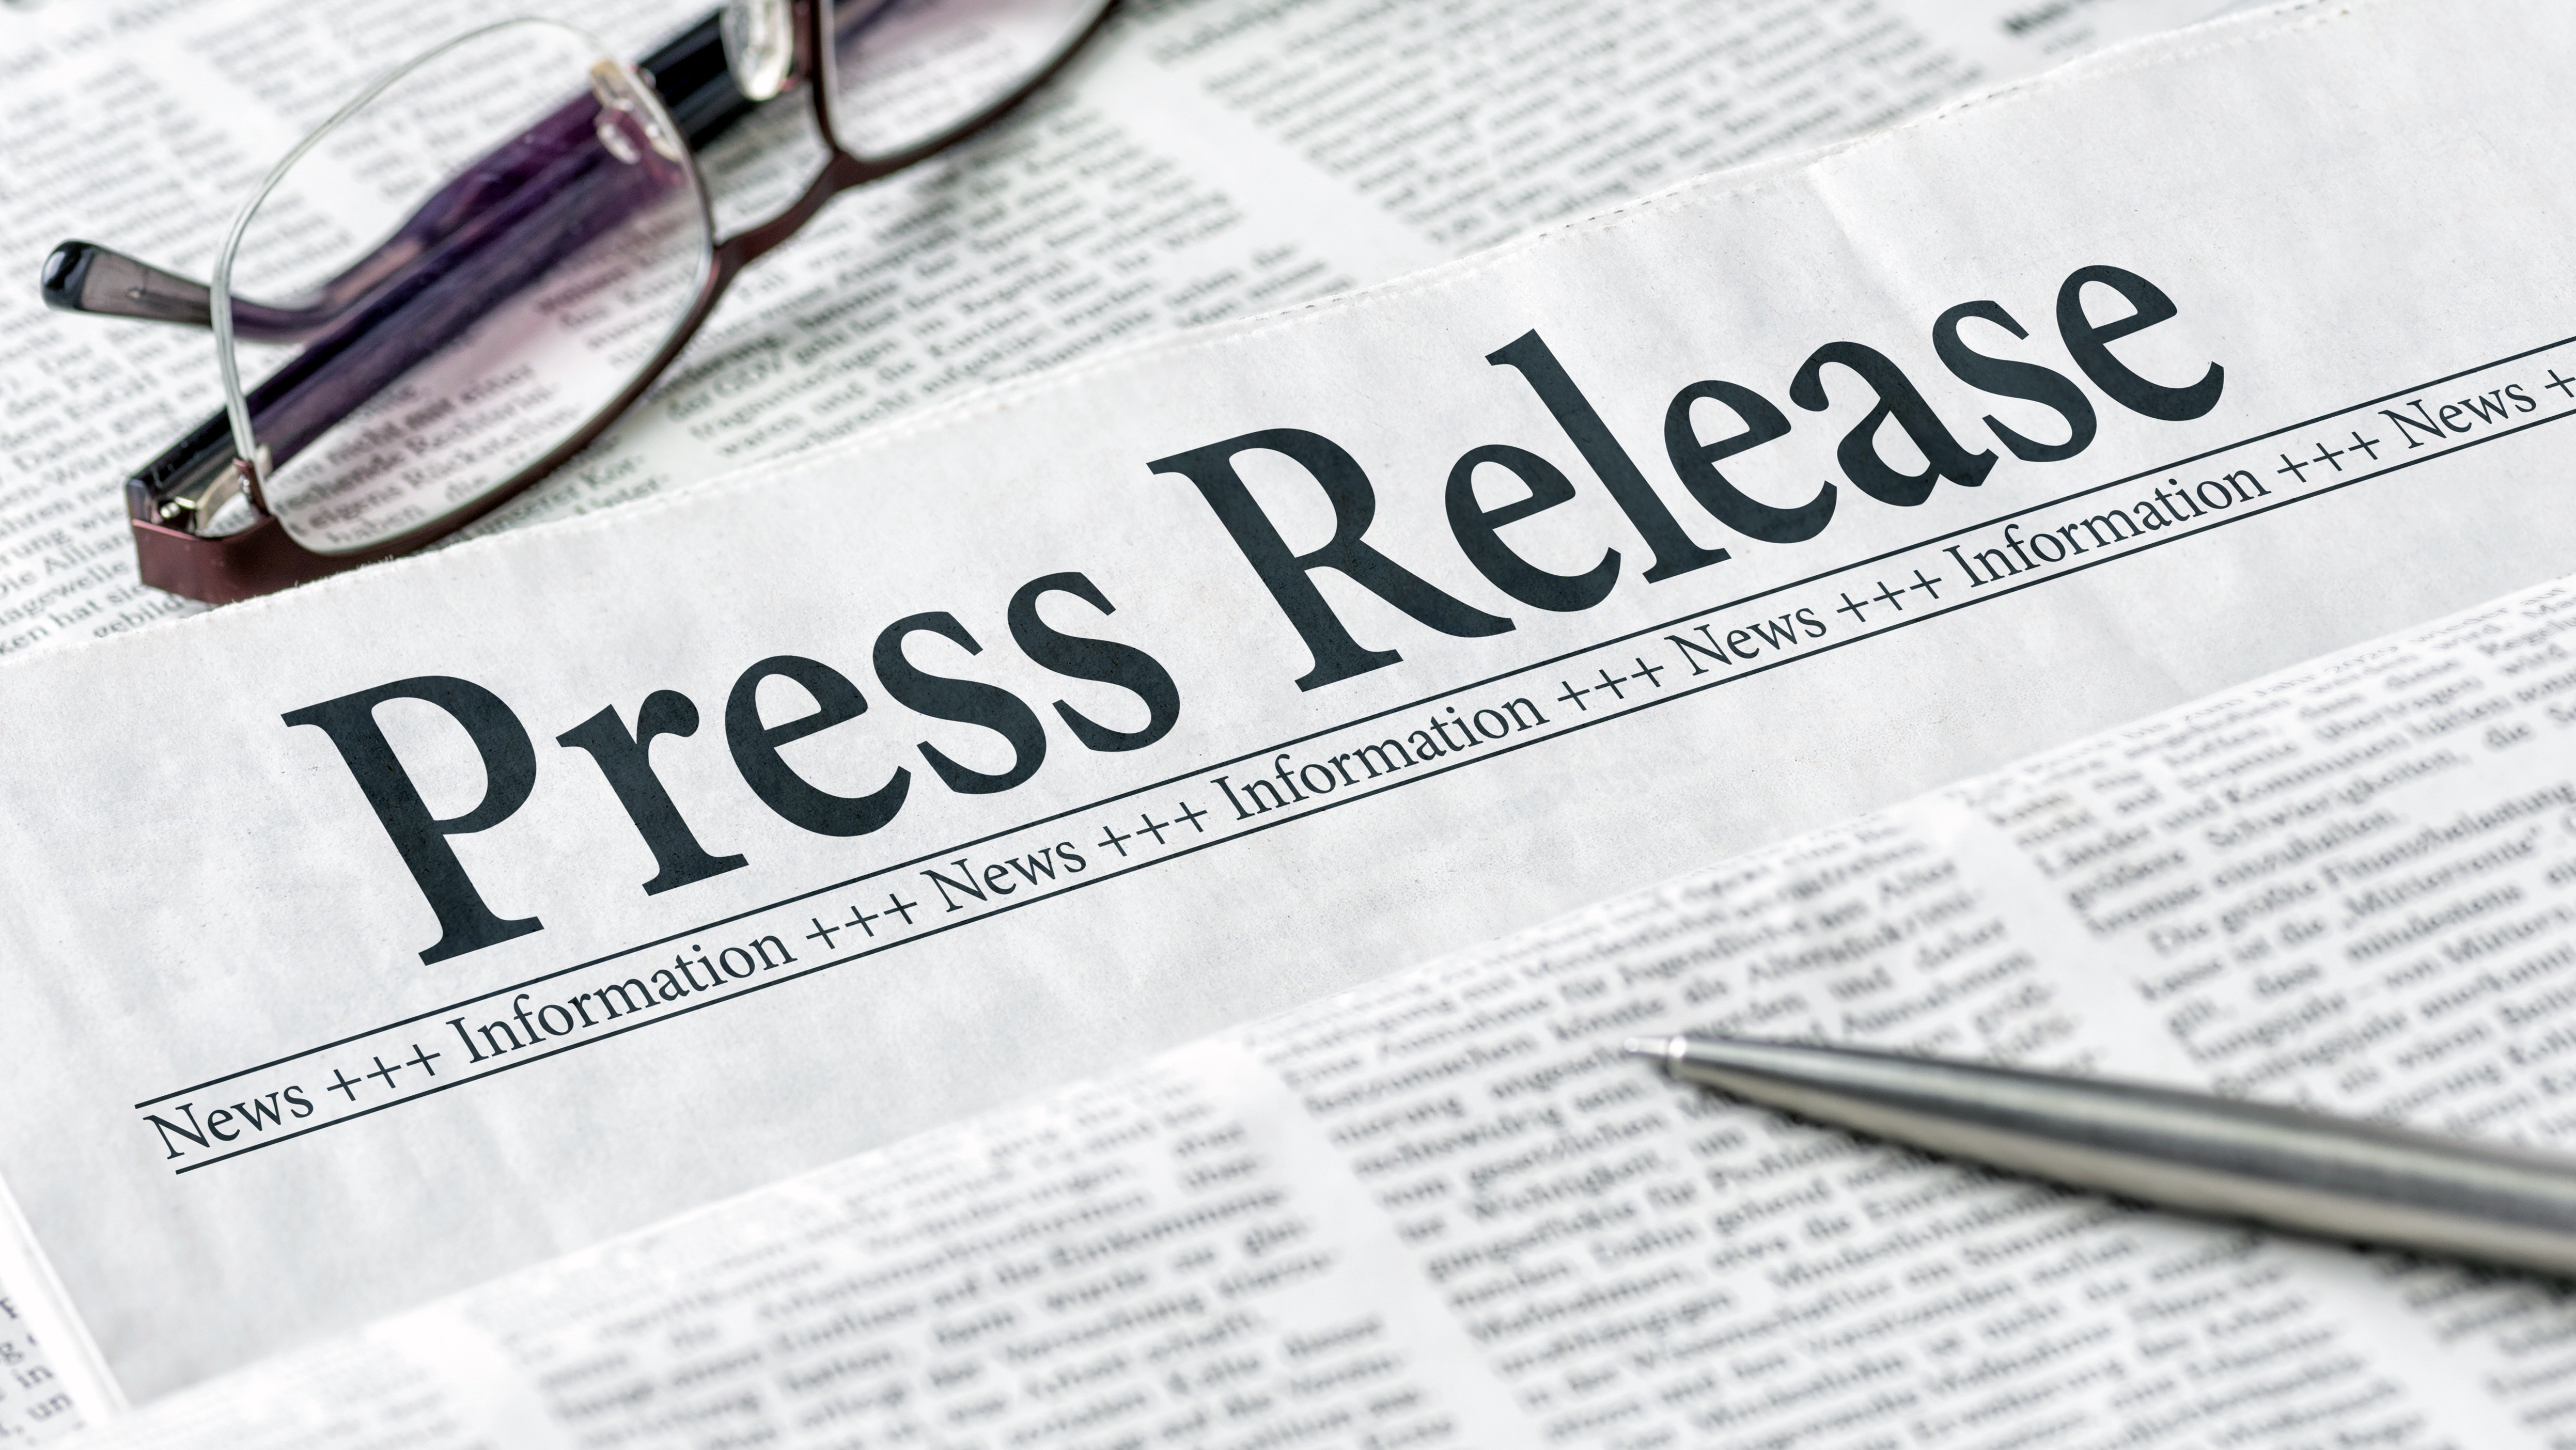 8 Tips to Up Your Press Release Template Game